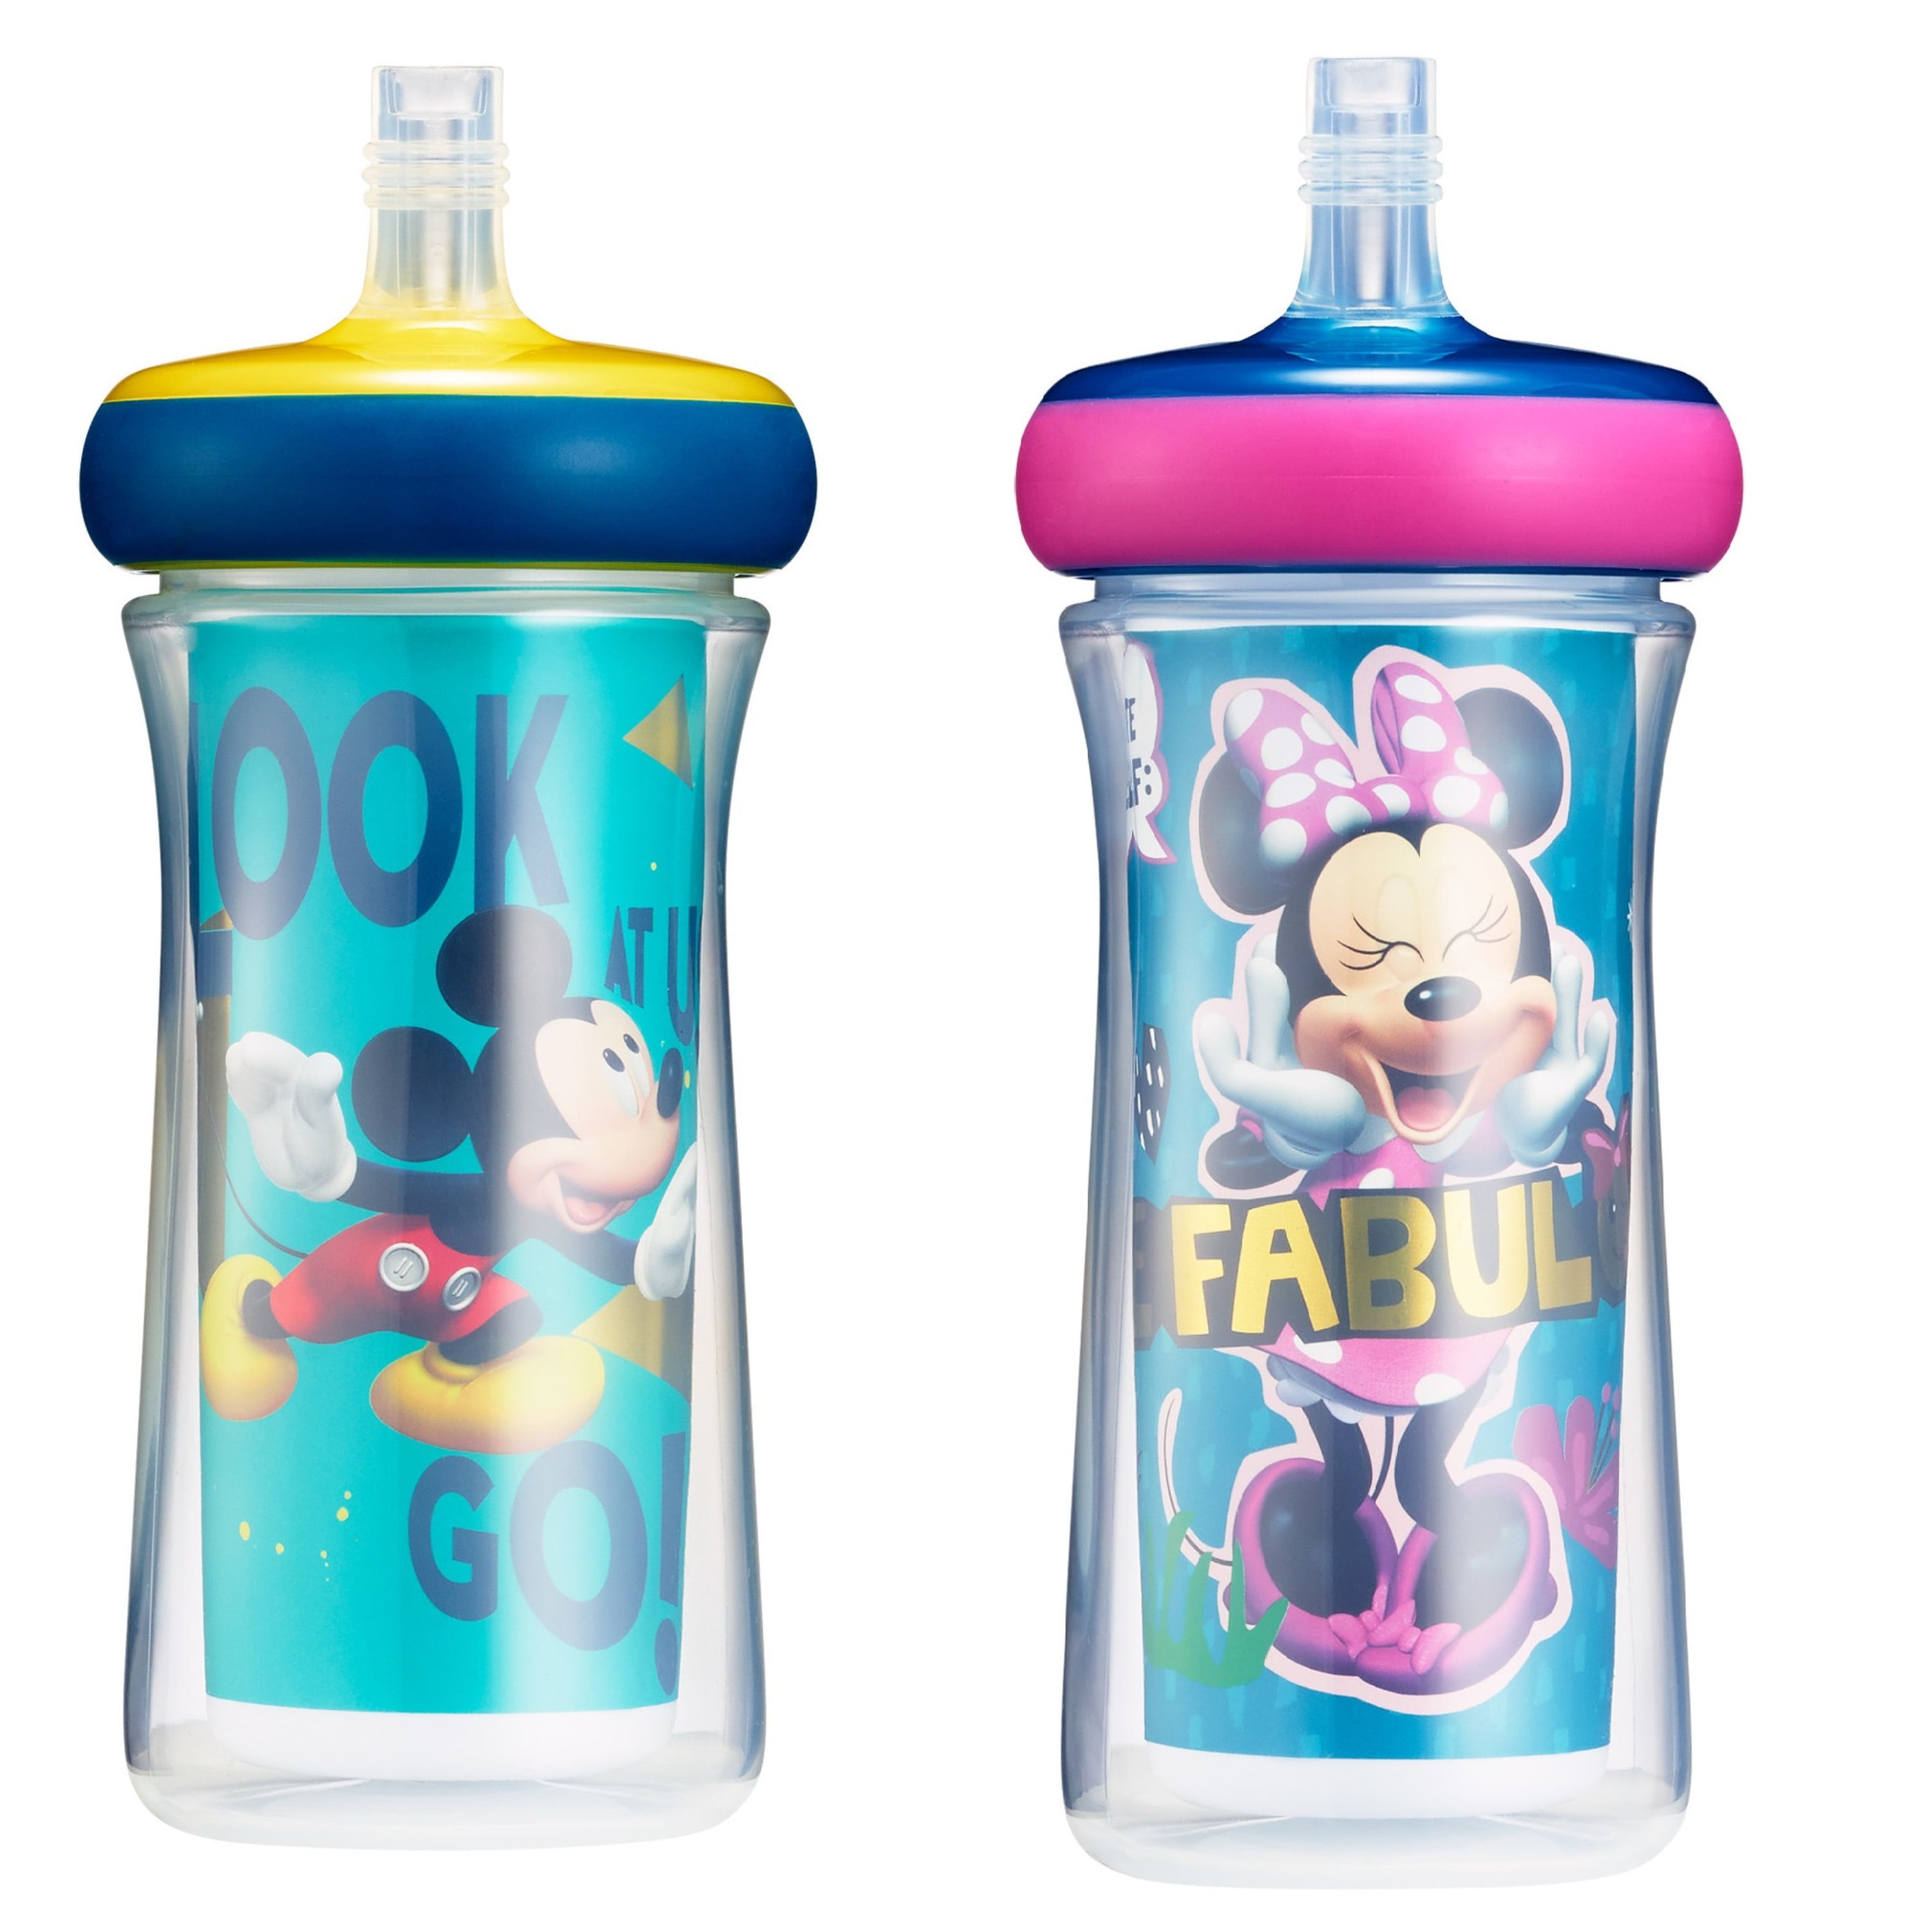 The First Years Disney Minnie Mouse Flip Top Straw Cups - Disney Toddler  Cups with Name Tag Charm - …See more The First Years Disney Minnie Mouse  Flip